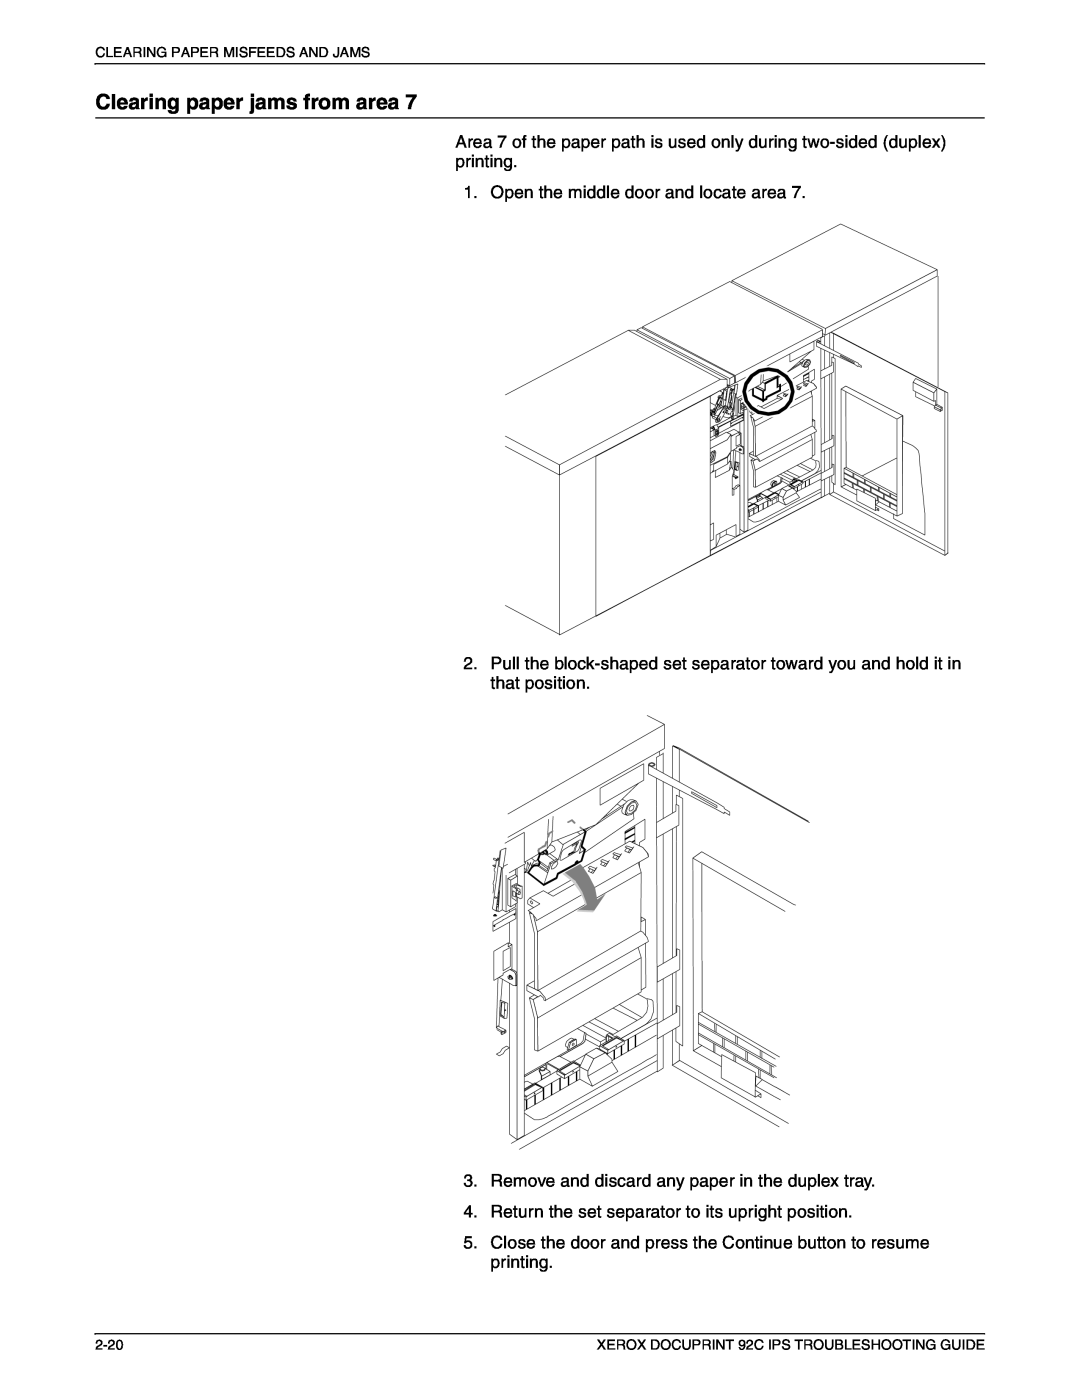 Xerox 92C IPS manual Clearing paper jams from area 